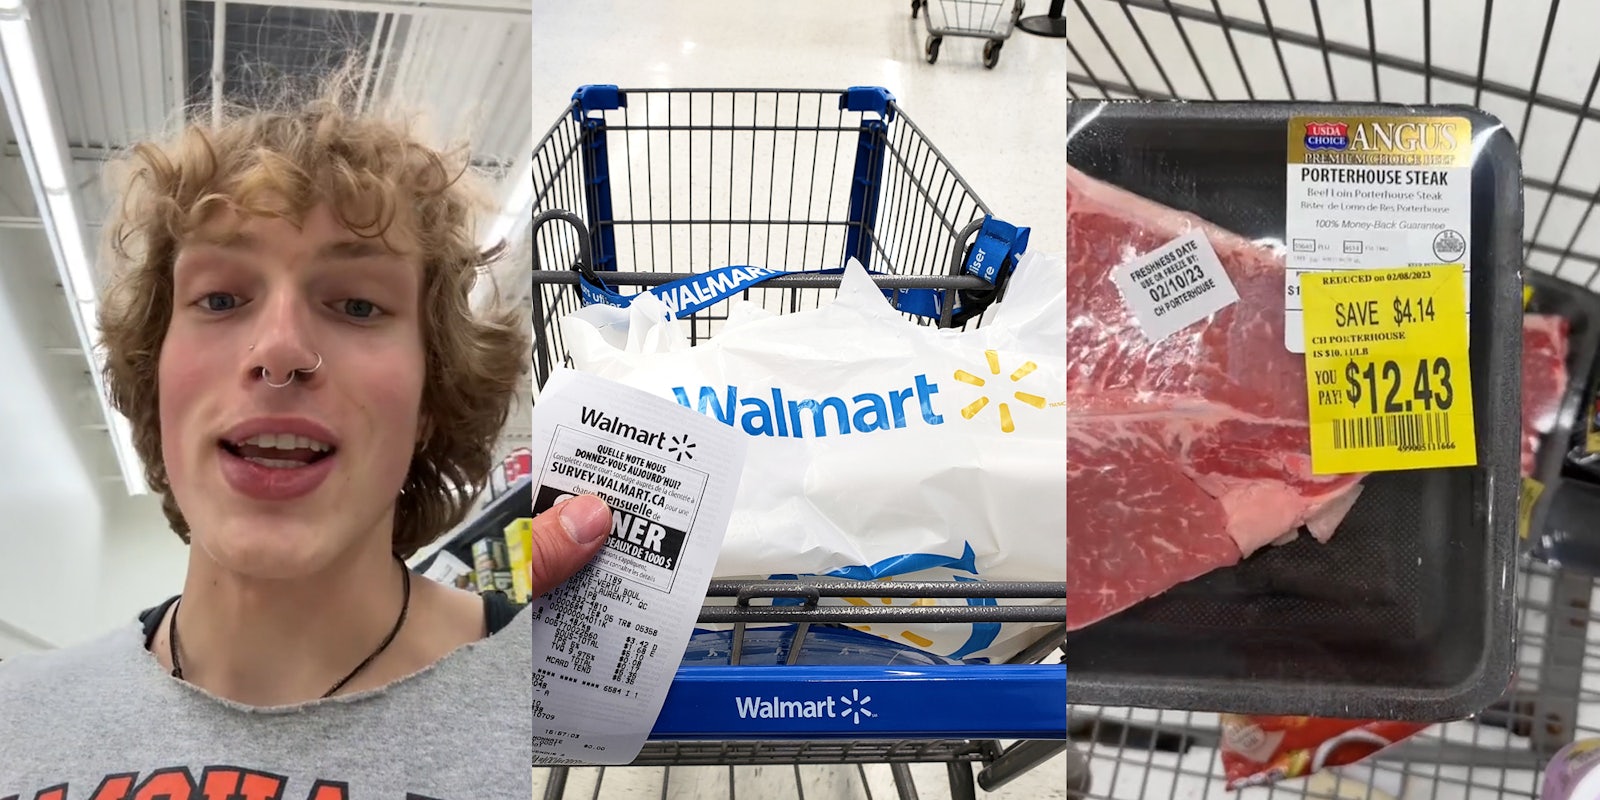 man at Walmart speaking (l) man holding receipt in front of Walmart shopping cart with bag (c) Walmart meat on sale held up over cart with more meat inside (r)